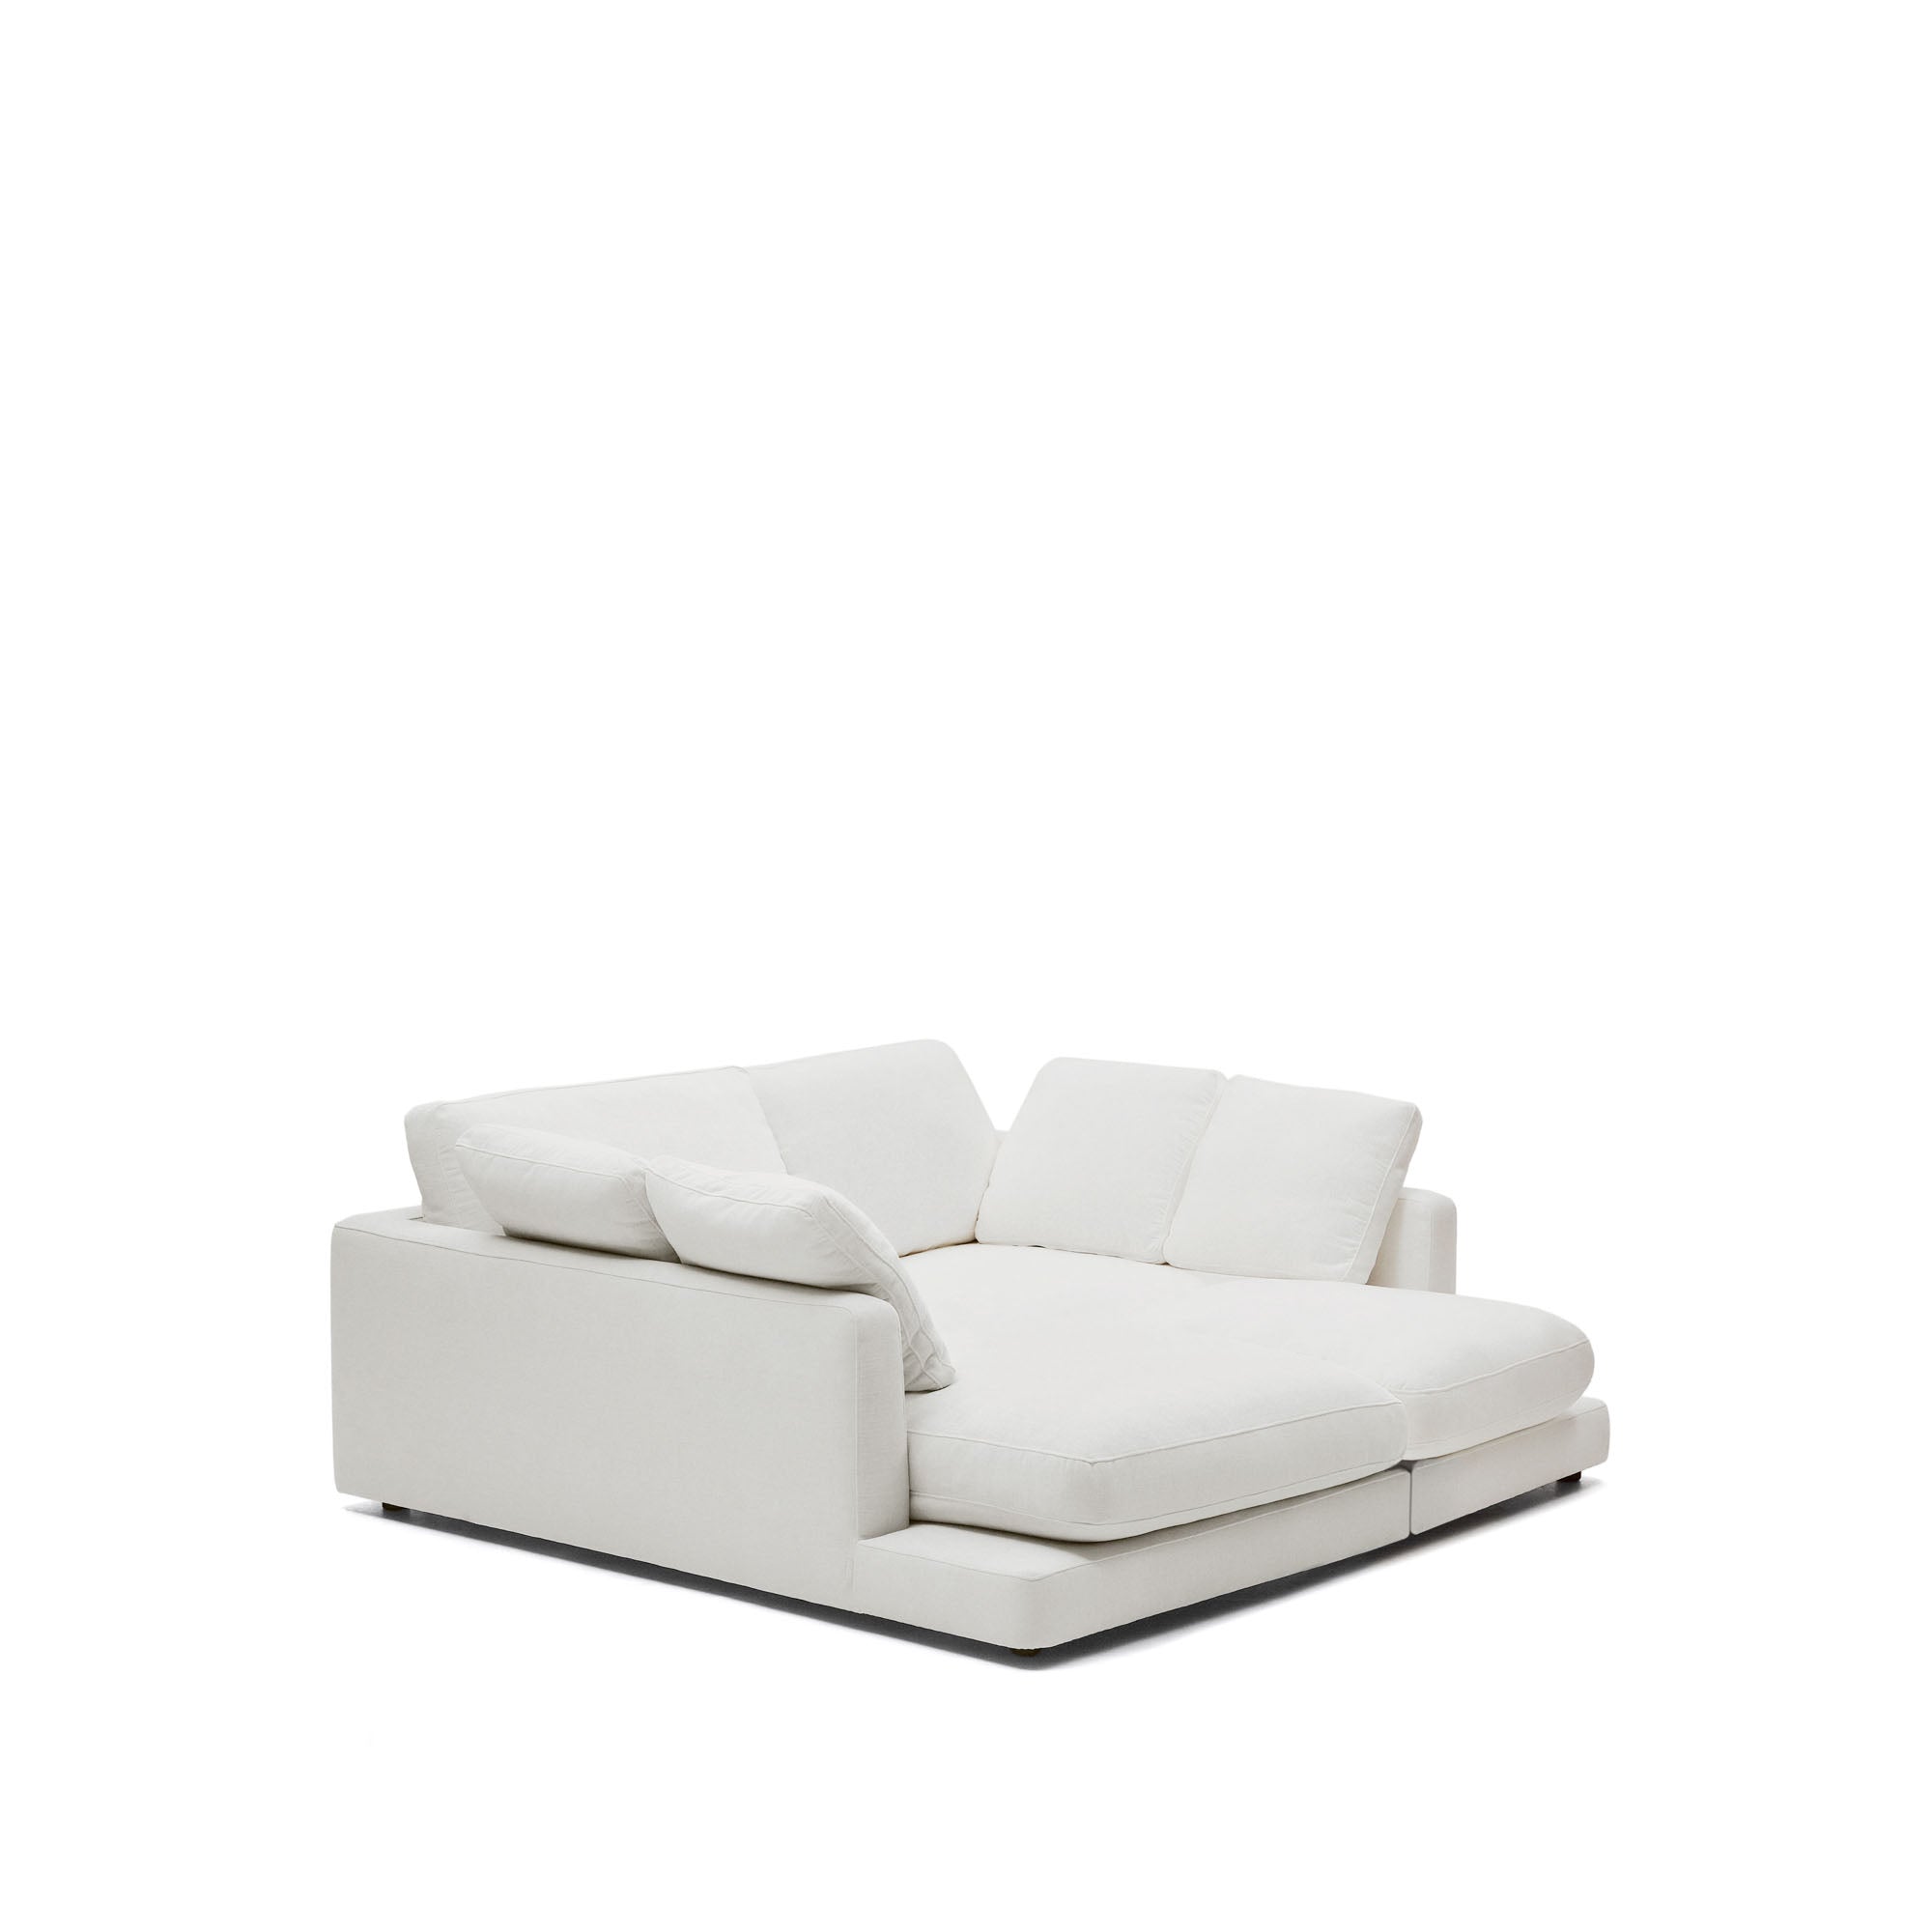 Gala 3 seater sofa with double chaise longue in white, 210 cm